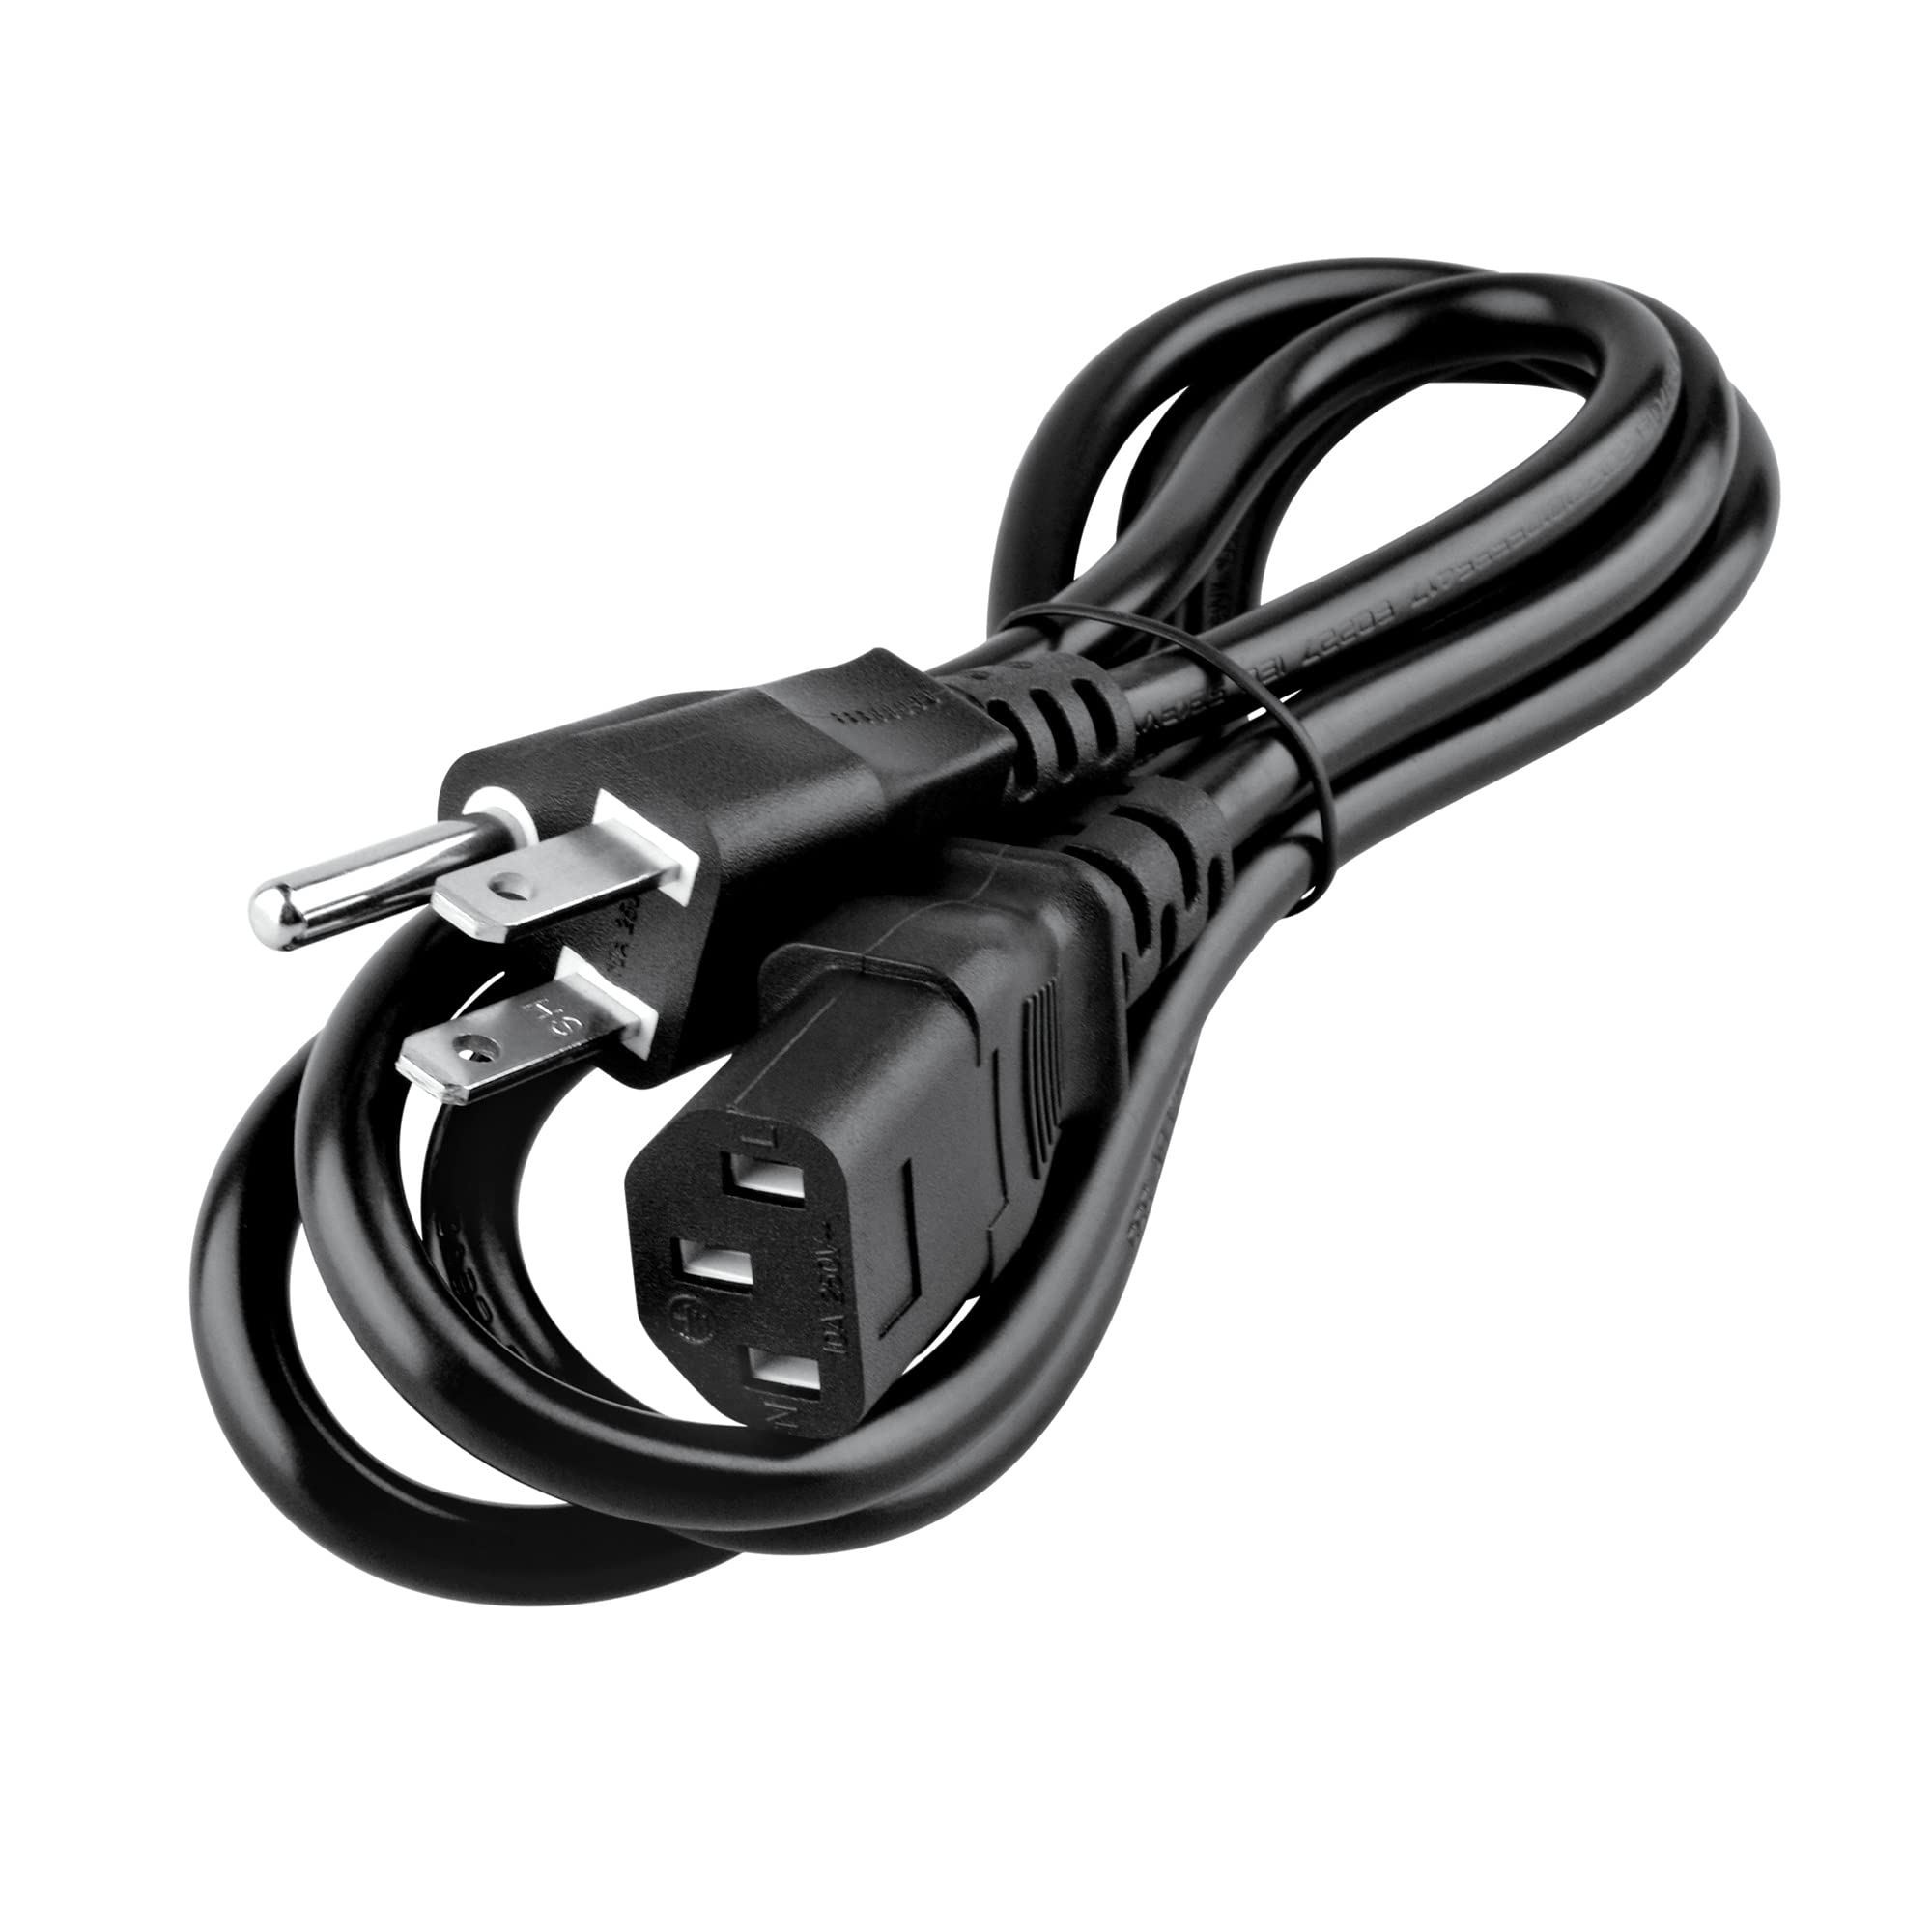 Jantoy 5ft AC Power Cord Cable Lead Compatible with Zojirushi NP-GBC05 5.5-Cup Micom Rice Cooker